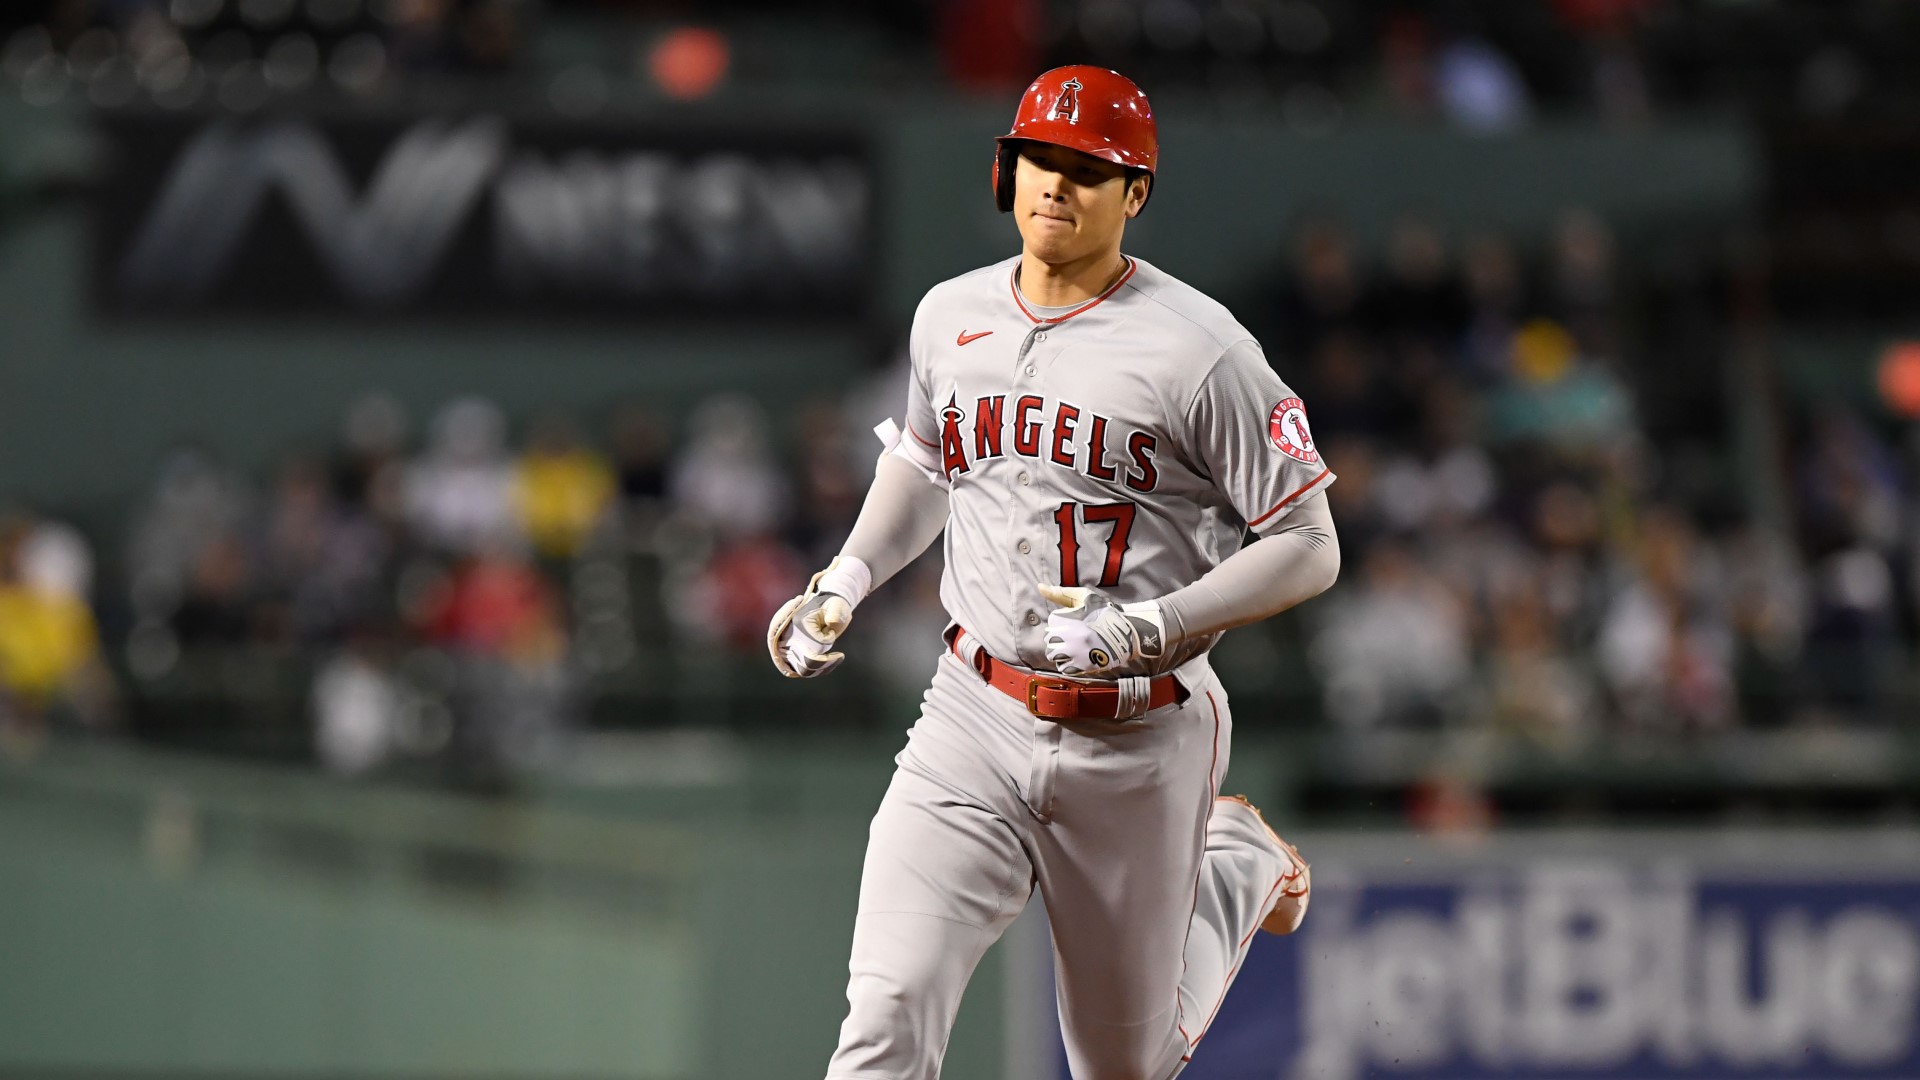 Shohei Ohtani's free agency causes buzz at All-Star Game